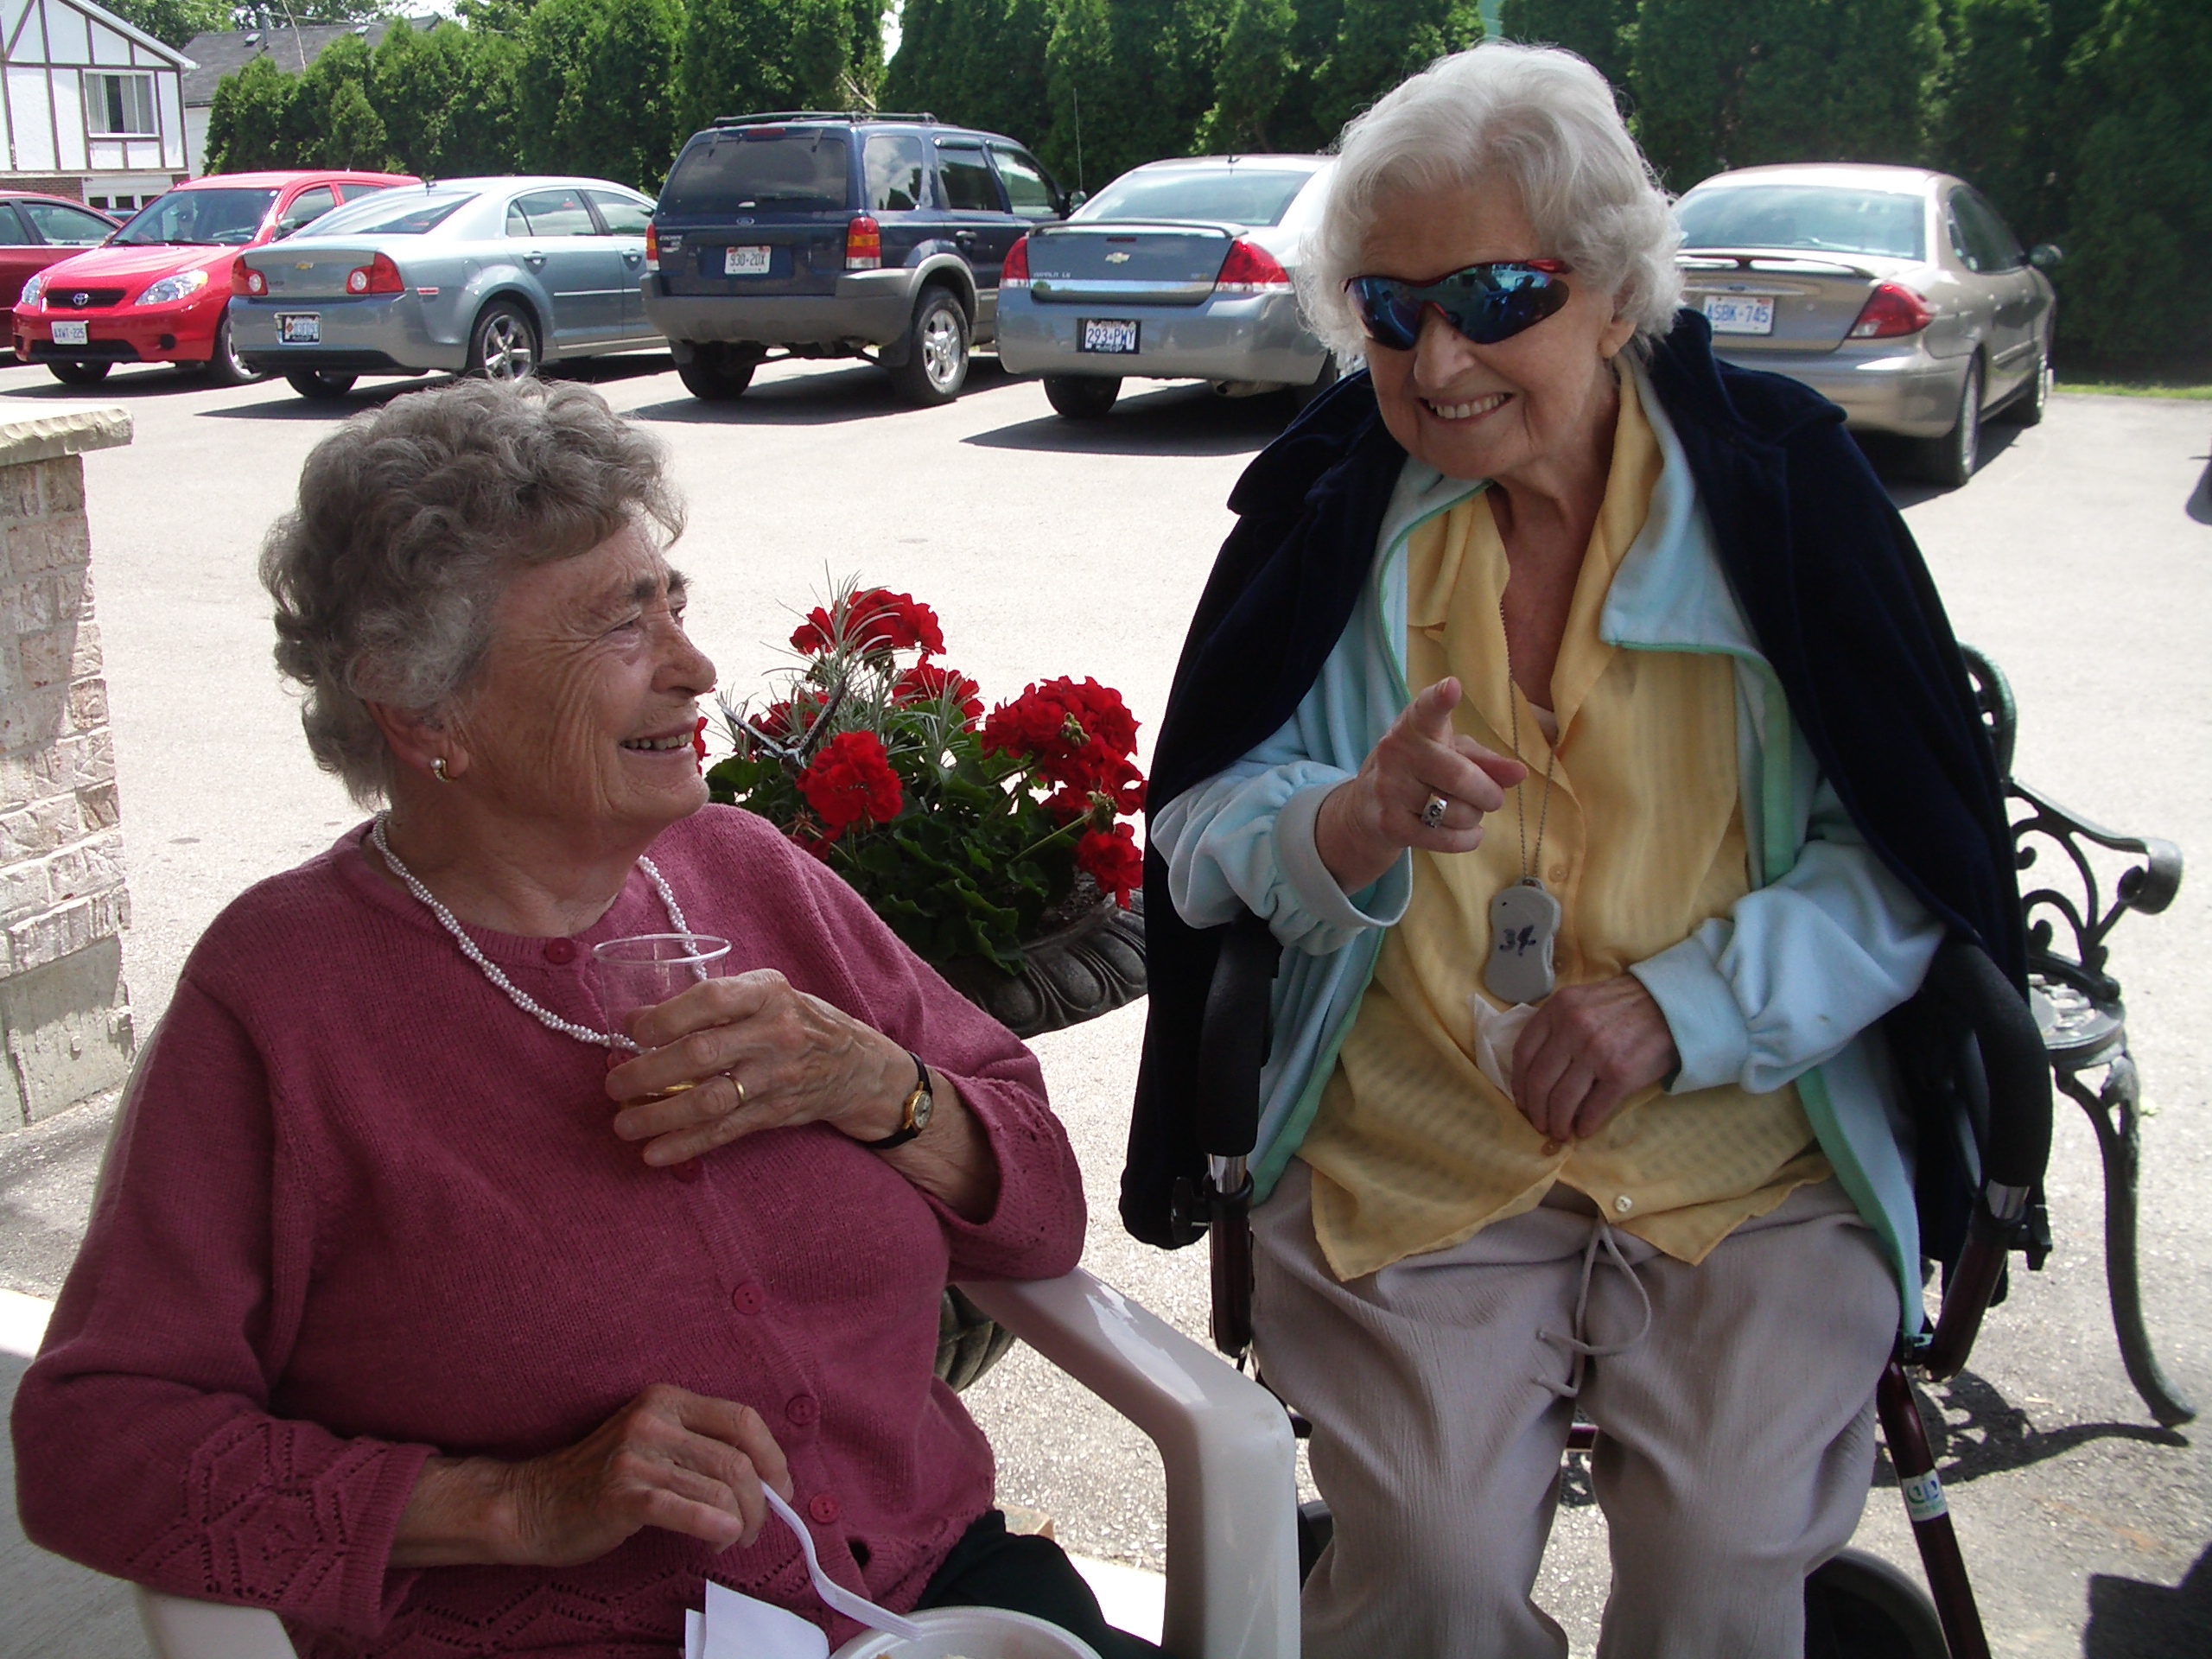 Our Oma, Anne Cepek (pictured right), visiting with her friend at the Strawberry Social event.